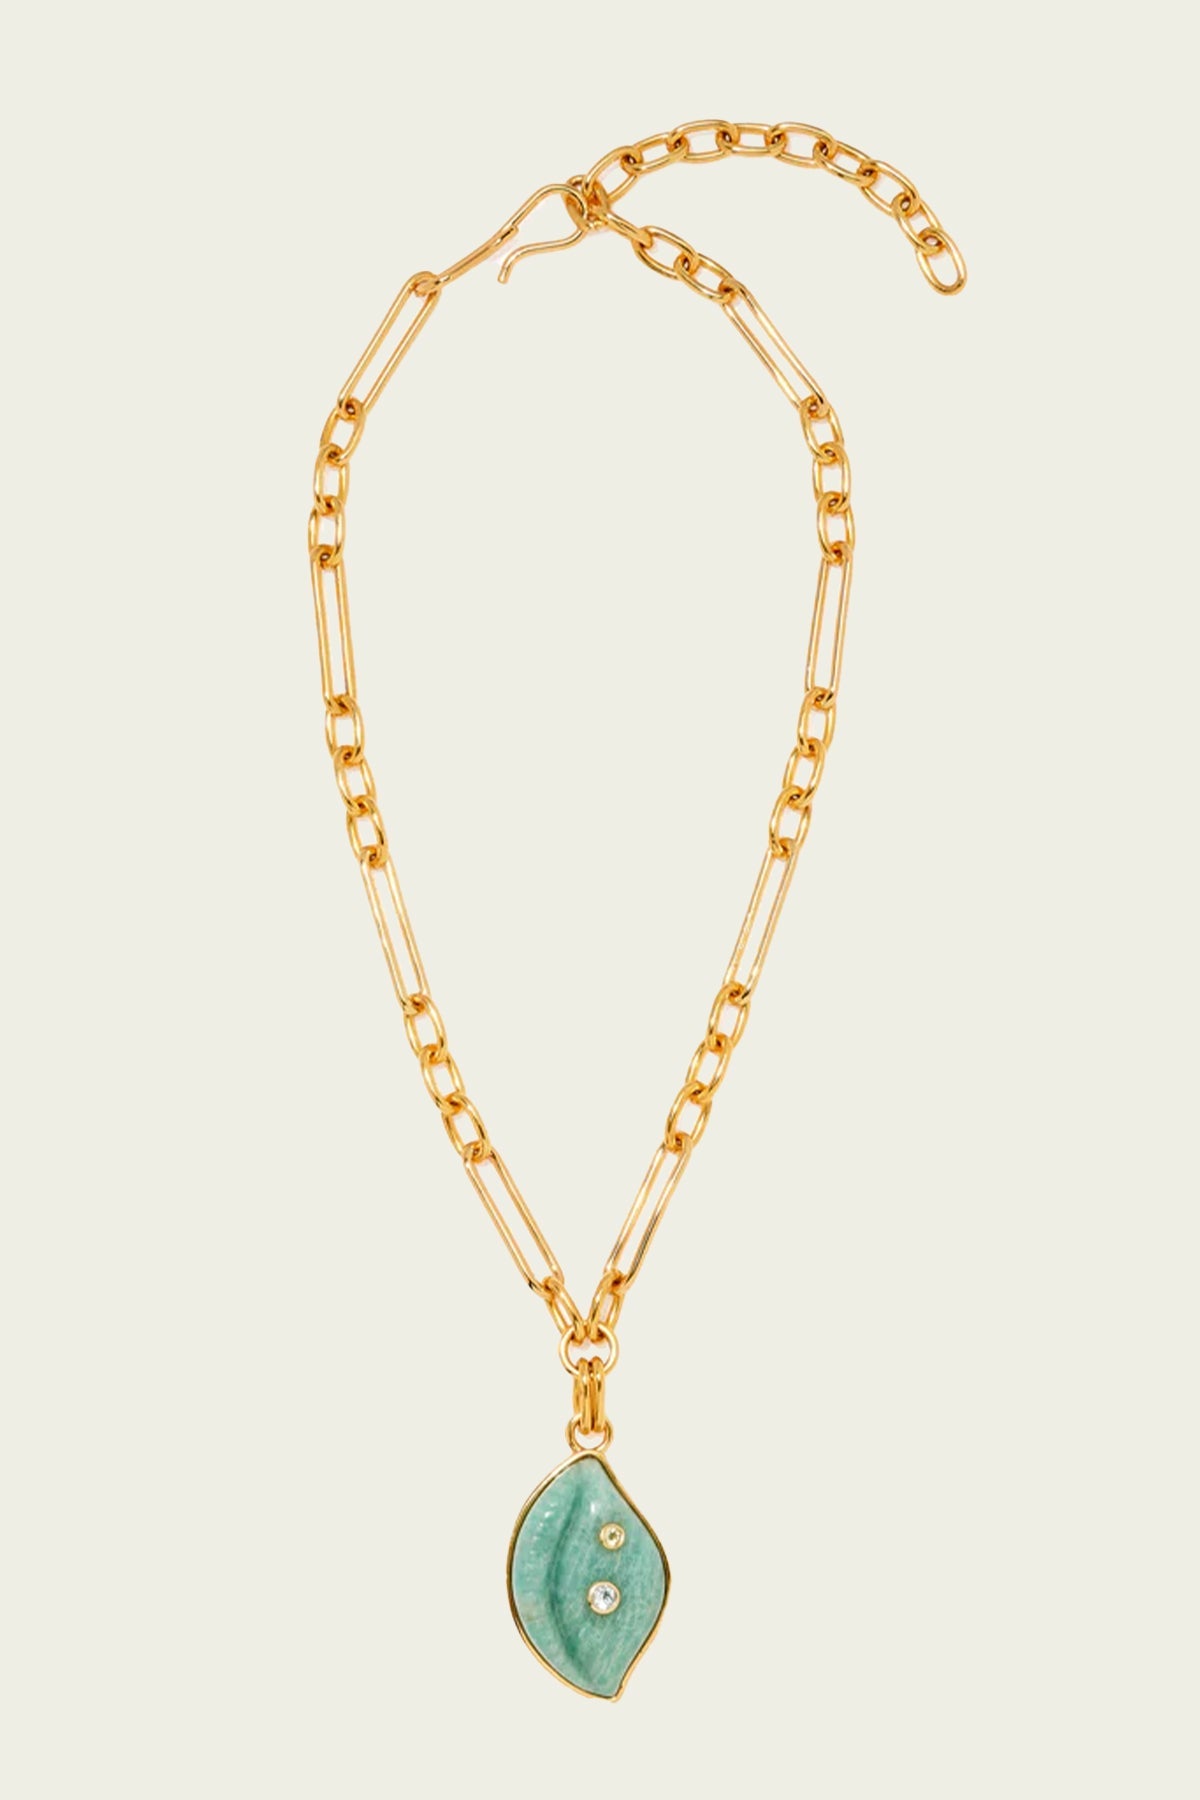 Cowrie Shell Necklace in Amazonite - shop-olivia.com